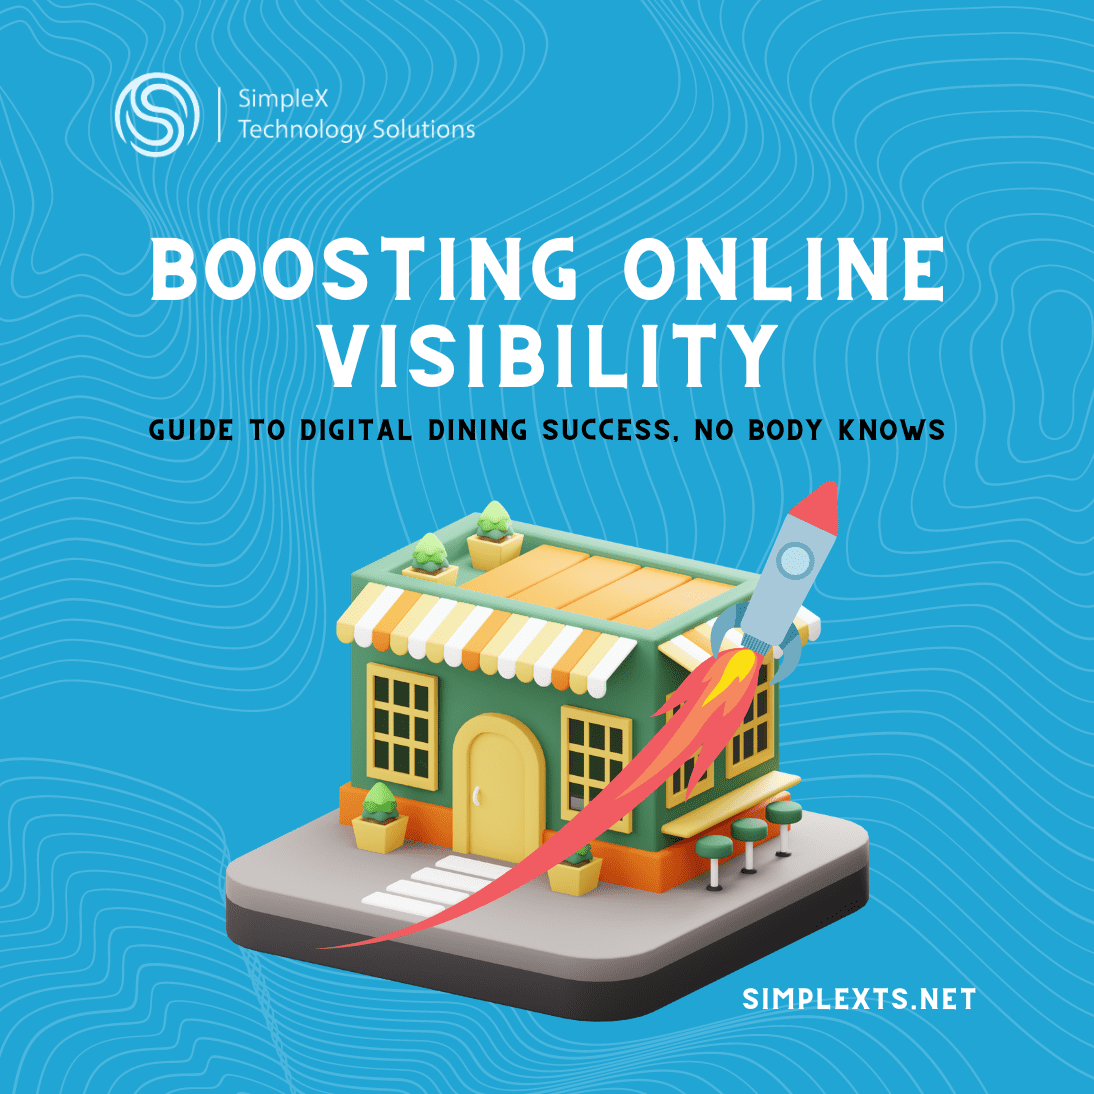 Boosting online visibility